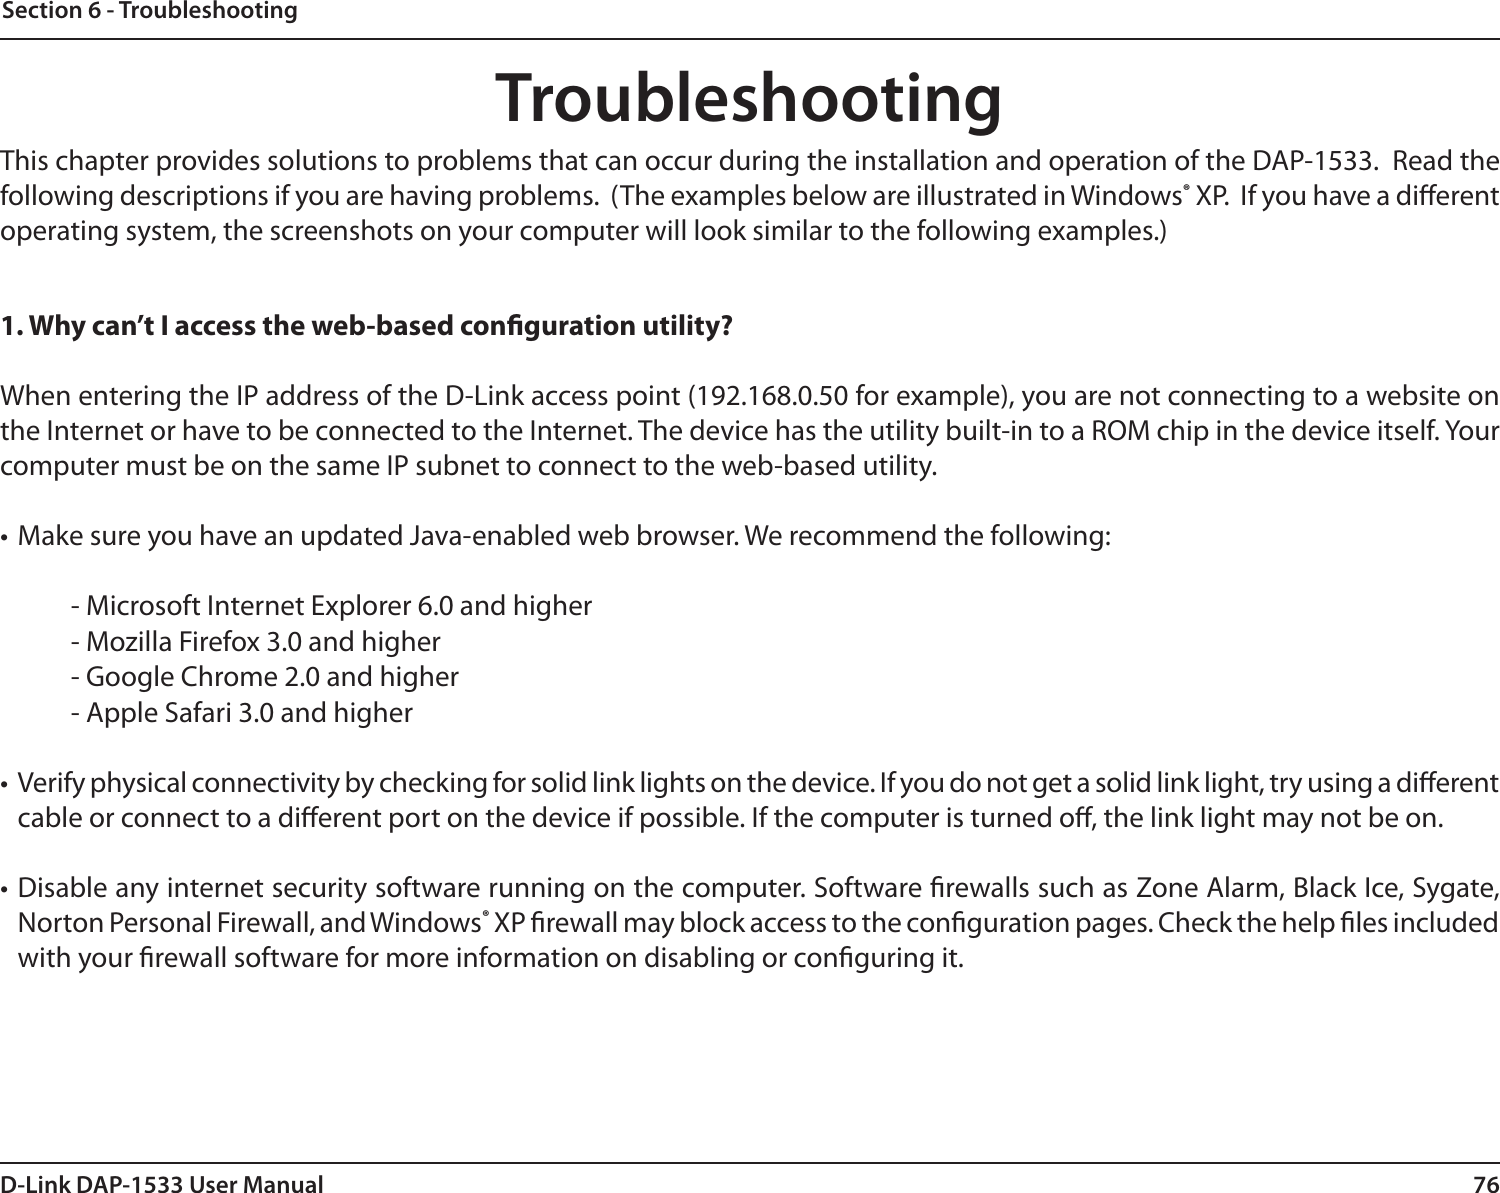 76D-Link DAP-1533 User ManualSection 6 - TroubleshootingTroubleshootingThis chapter provides solutions to problems that can occur during the installation and operation of the DAP-1533.  Read the following descriptions if you are having problems.  (The examples below are illustrated in Windows® XP.  If you have a dierent operating system, the screenshots on your computer will look similar to the following examples.)1. Why can’t I access the web-based conguration utility?When entering the IP address of the D-Link access point (192.168.0.50 for example), you are not connecting to a website on the Internet or have to be connected to the Internet. The device has the utility built-in to a ROM chip in the device itself. Your computer must be on the same IP subnet to connect to the web-based utility. • Make sure you have an updated Java-enabled web browser. We recommend the following: - Microsoft Internet Explorer 6.0 and higher- Mozilla Firefox 3.0 and higher- Google Chrome 2.0 and higher- Apple Safari 3.0 and higher• Verify physical connectivity by checking for solid link lights on the device. If you do not get a solid link light, try using a dierent cable or connect to a dierent port on the device if possible. If the computer is turned o, the link light may not be on.• Disable any internet security software running on the computer. Software rewalls such as Zone Alarm, Black Ice, Sygate, Norton Personal Firewall, and Windows® XP rewall may block access to the conguration pages. Check the help les included with your rewall software for more information on disabling or conguring it.